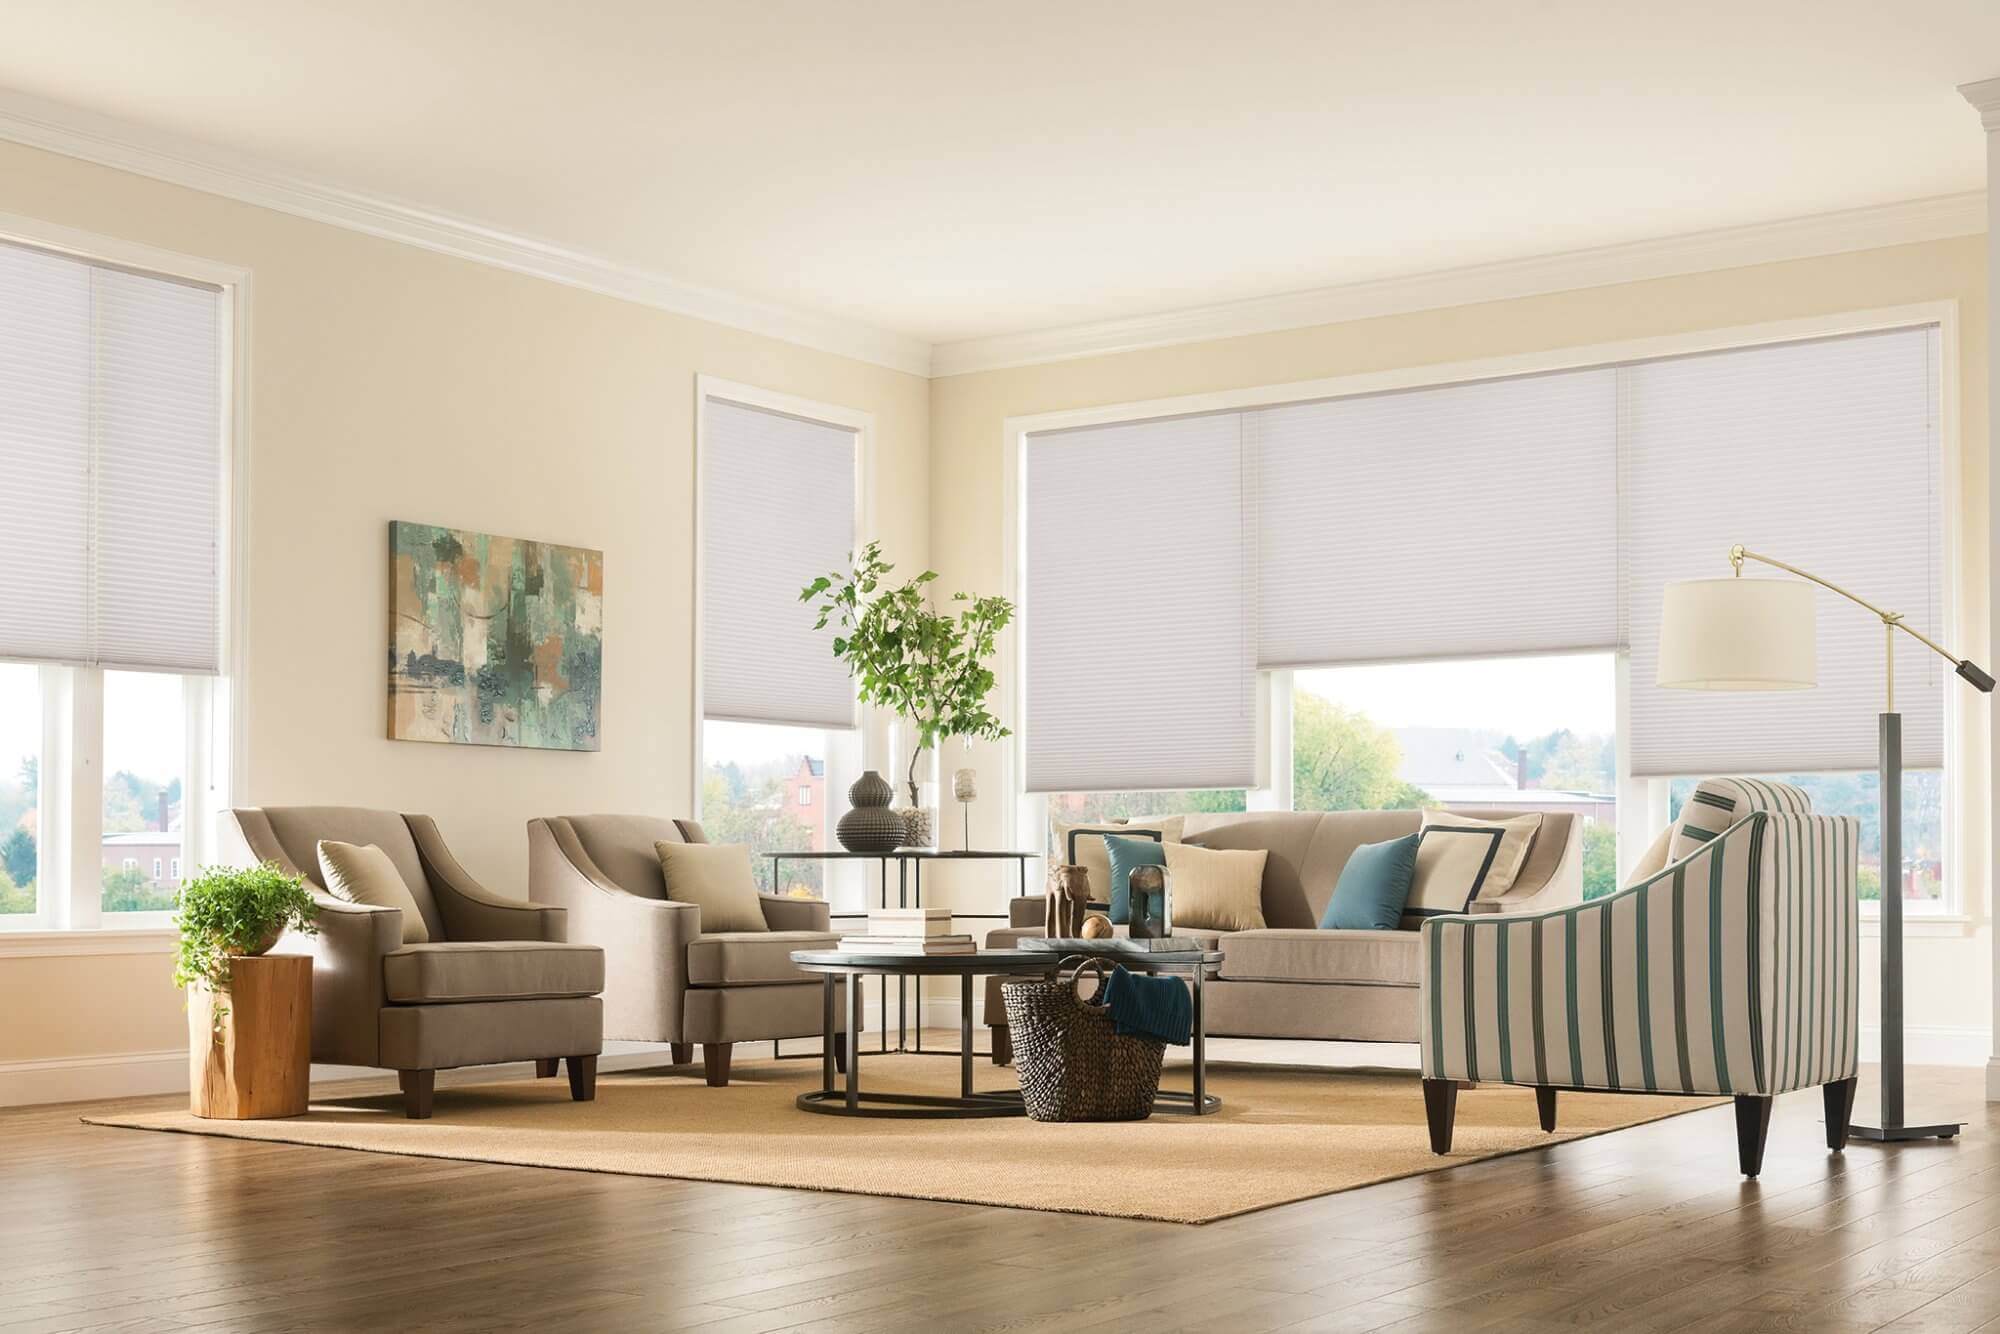 Pictures Of Window Treatments For Living Room